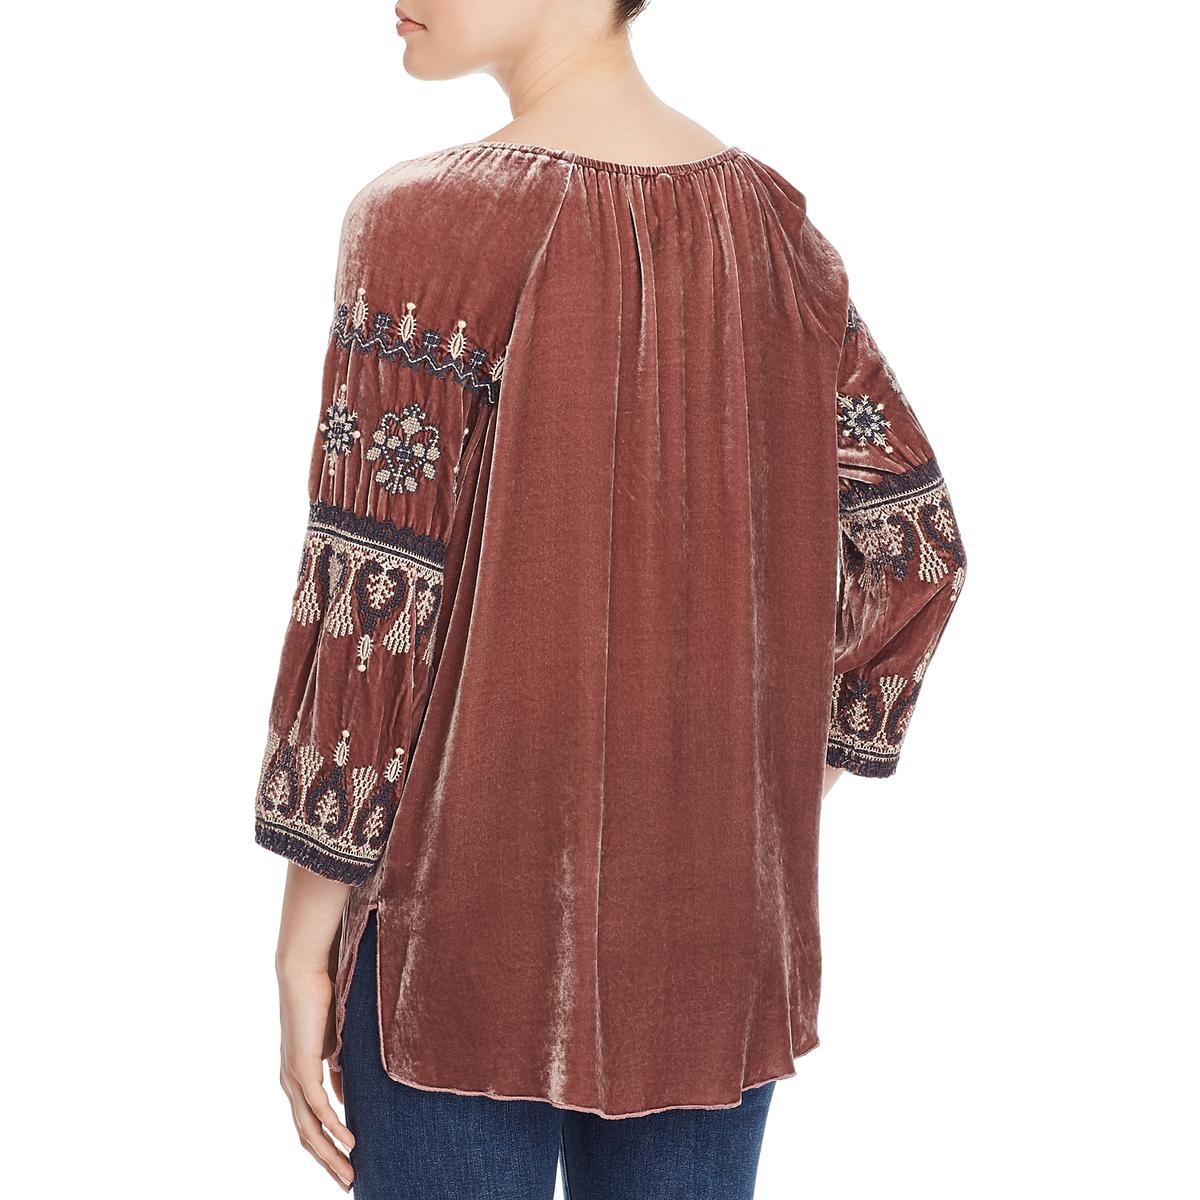 Johnny Was Womens Brown Velvet Embroided Blouse Peasant Top Shirt XS ...